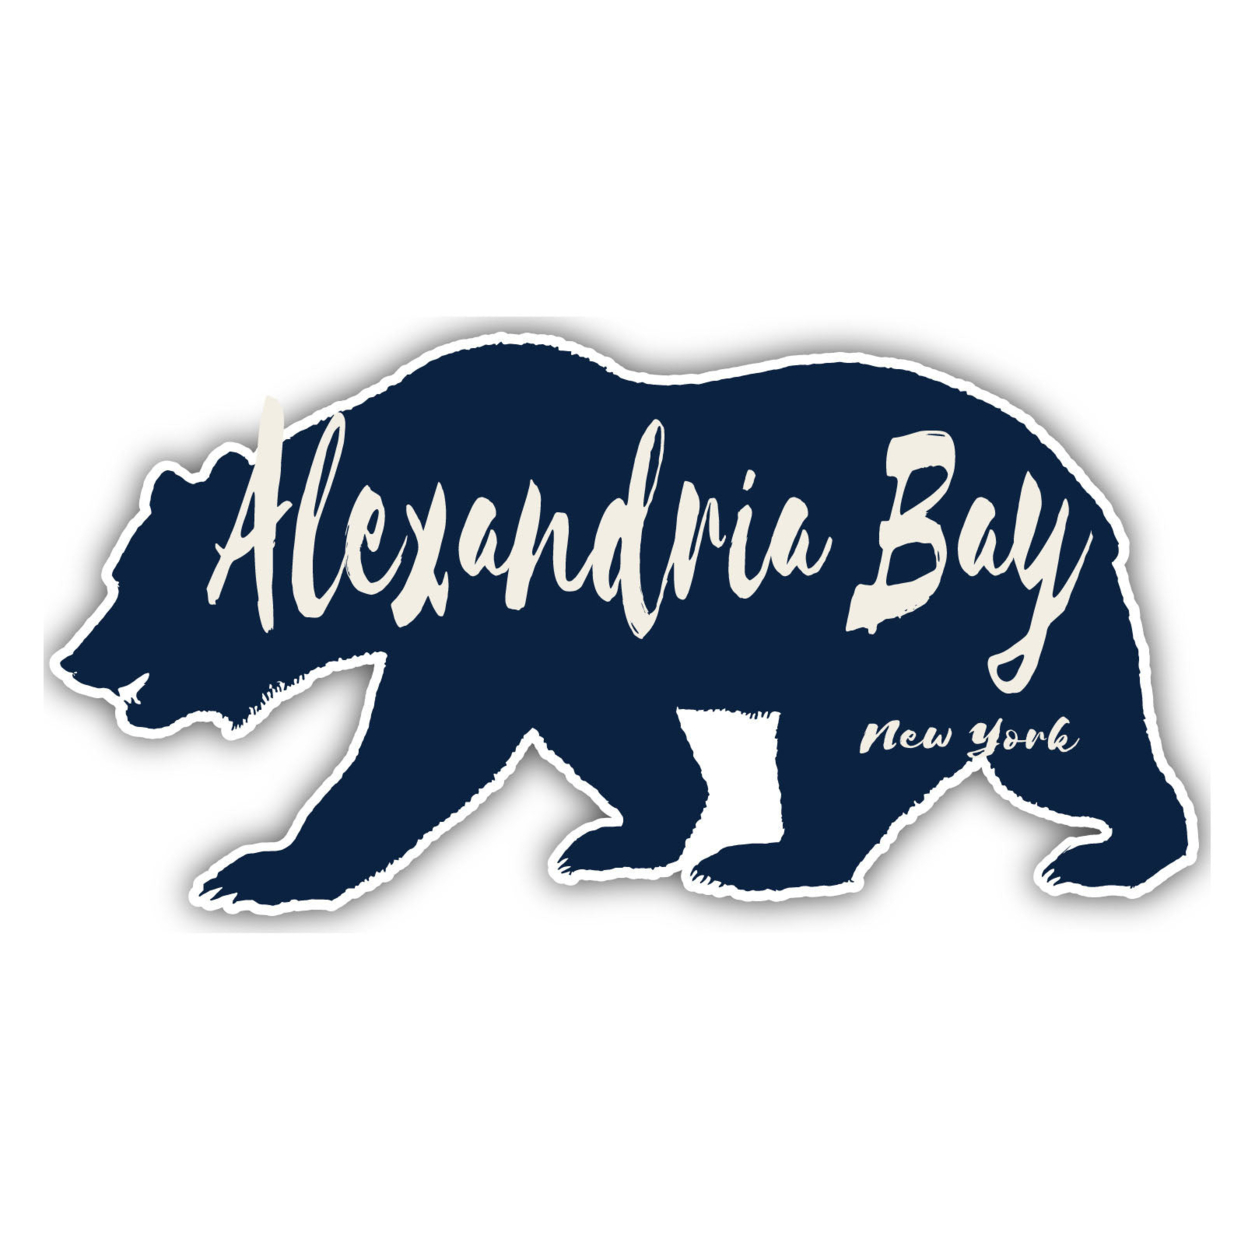 Alexandria Bay New York Souvenir Decorative Stickers (Choose Theme And Size) - 4-Pack, 12-Inch, Bear